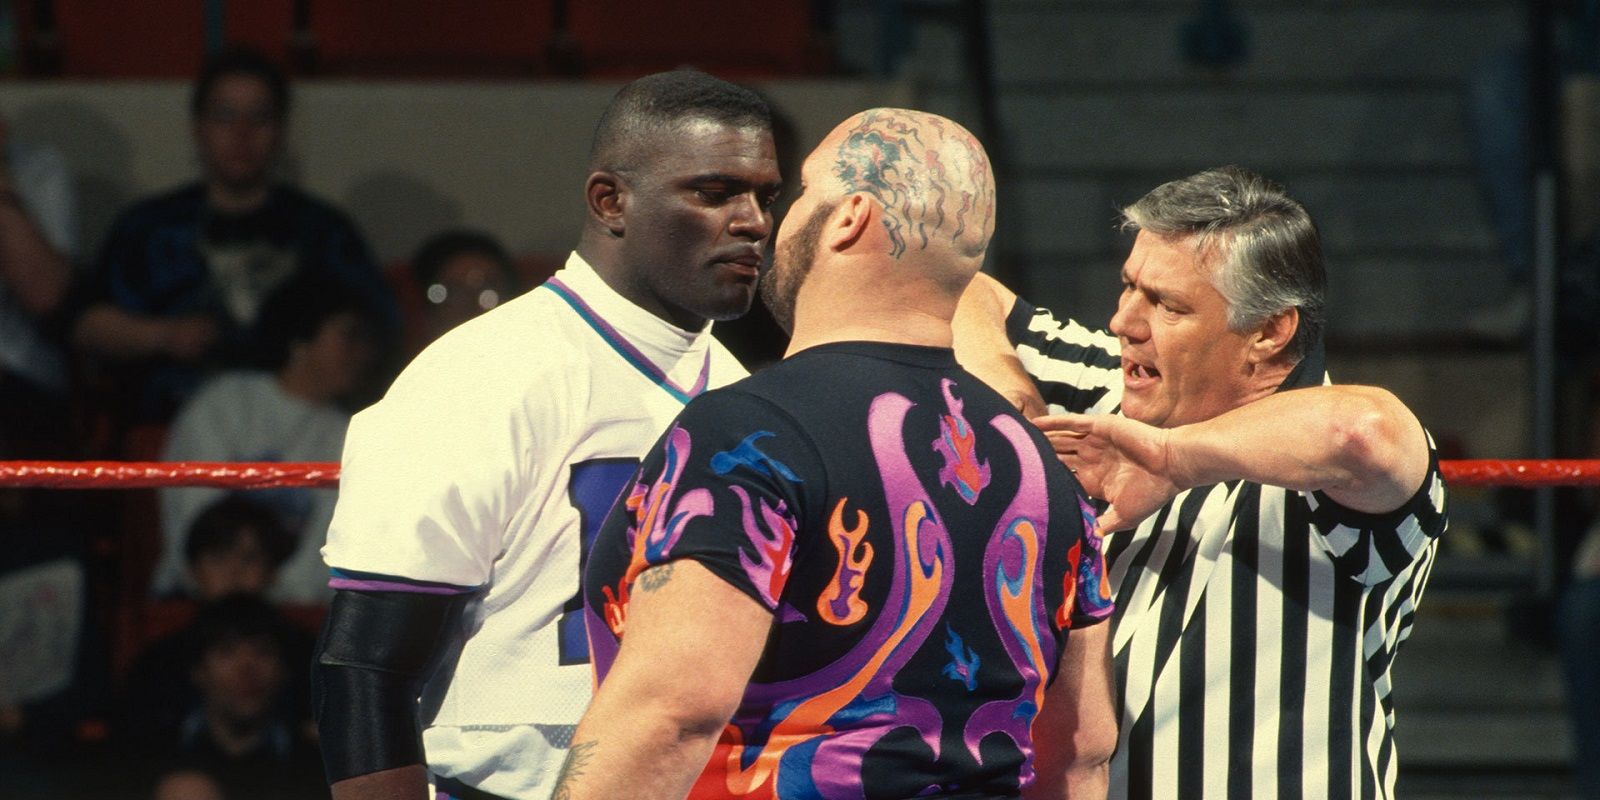 Lawrence Taylor faces Bam Bam Bigelow in a match at Wrestlemania XI